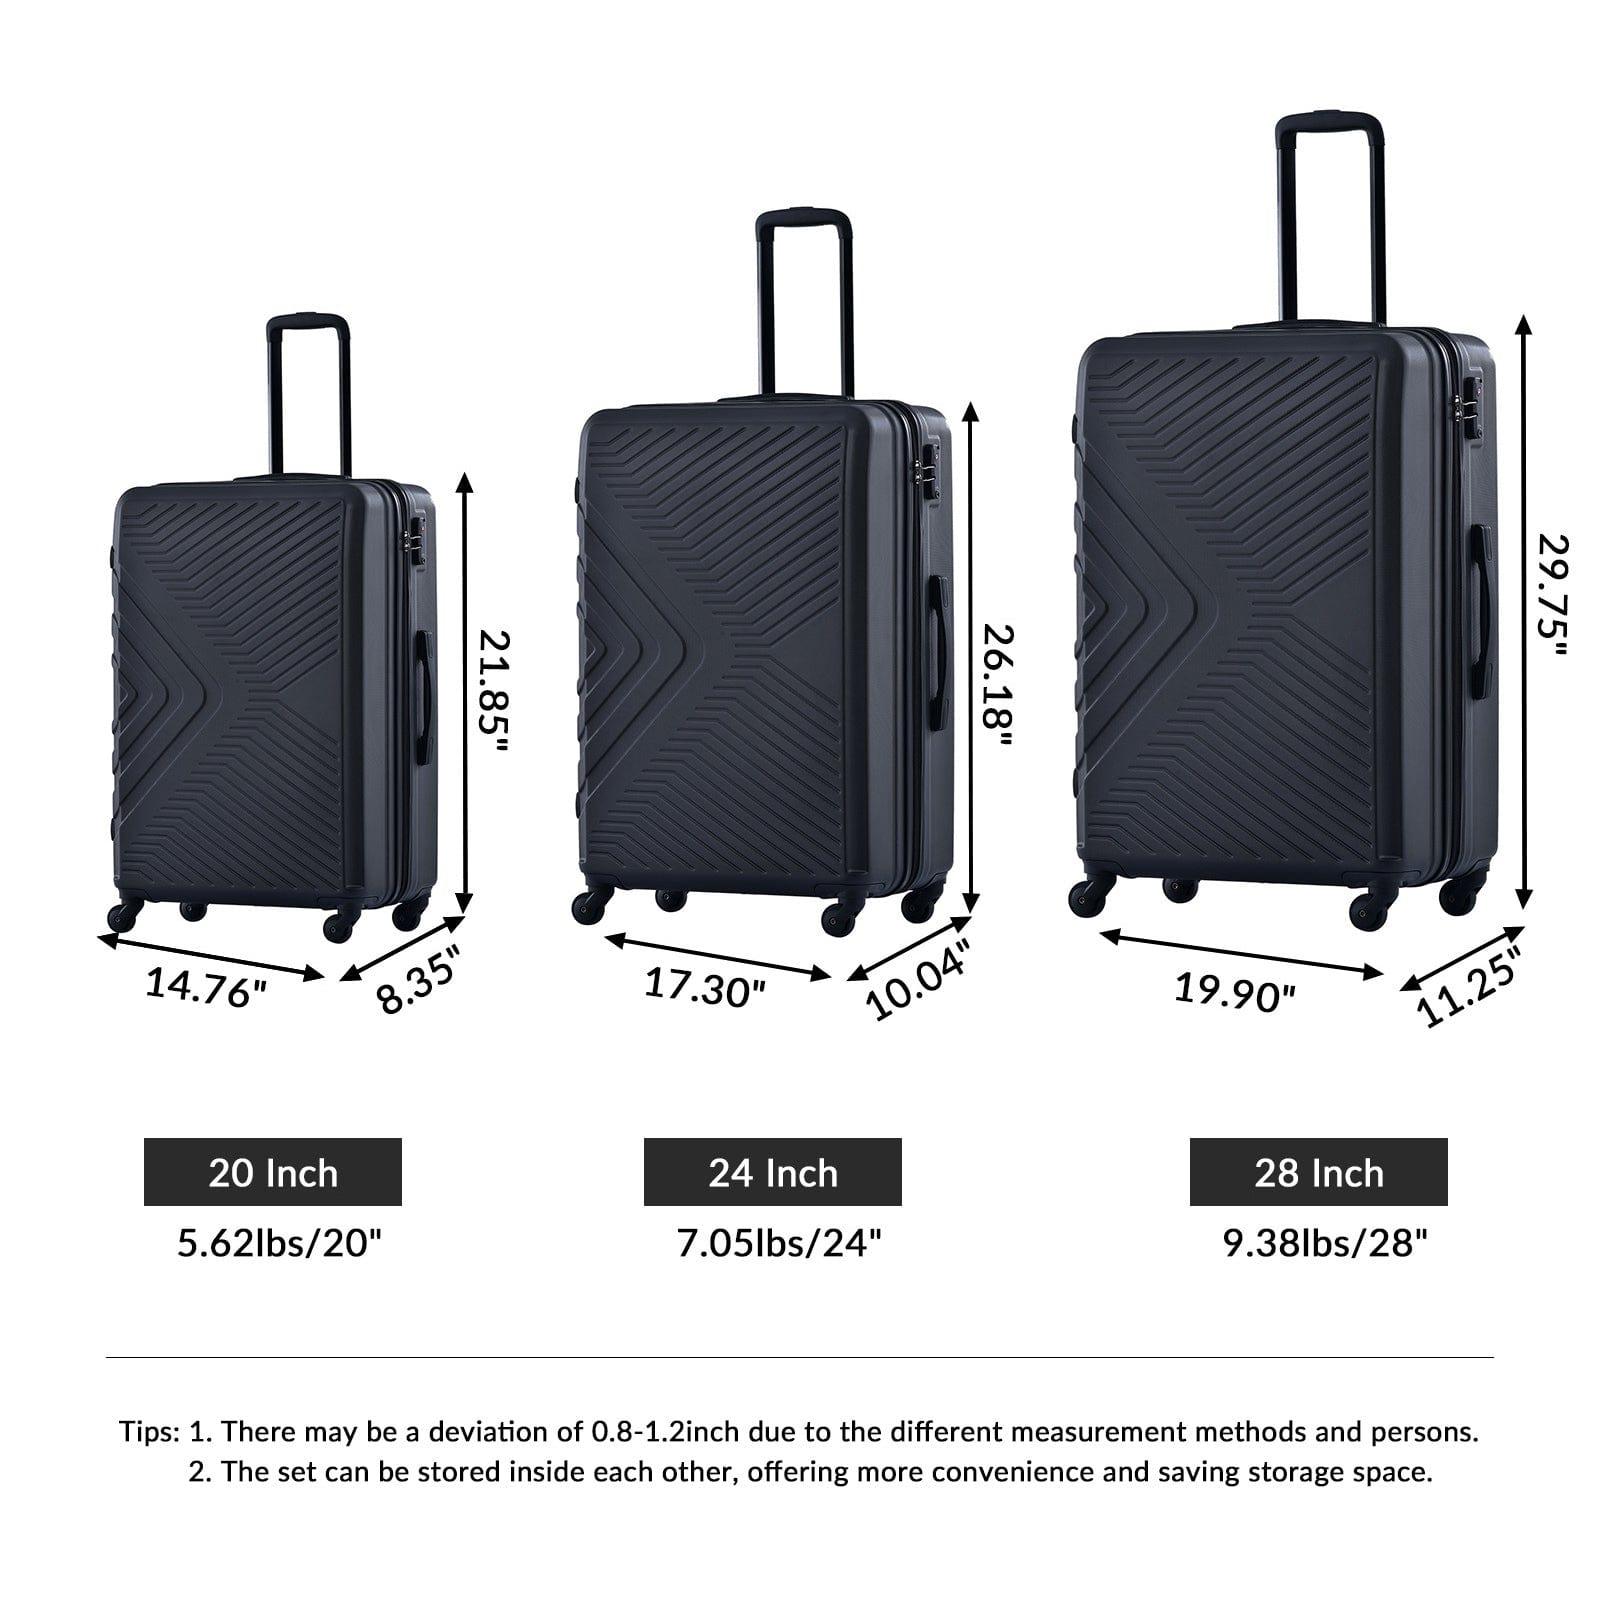 Shop 3 Piece Luggage Sets ABS Lightweight Suitcase with Two Hooks, Spinner Wheels, TSA Lock, (20/24/28) Black Mademoiselle Home Decor